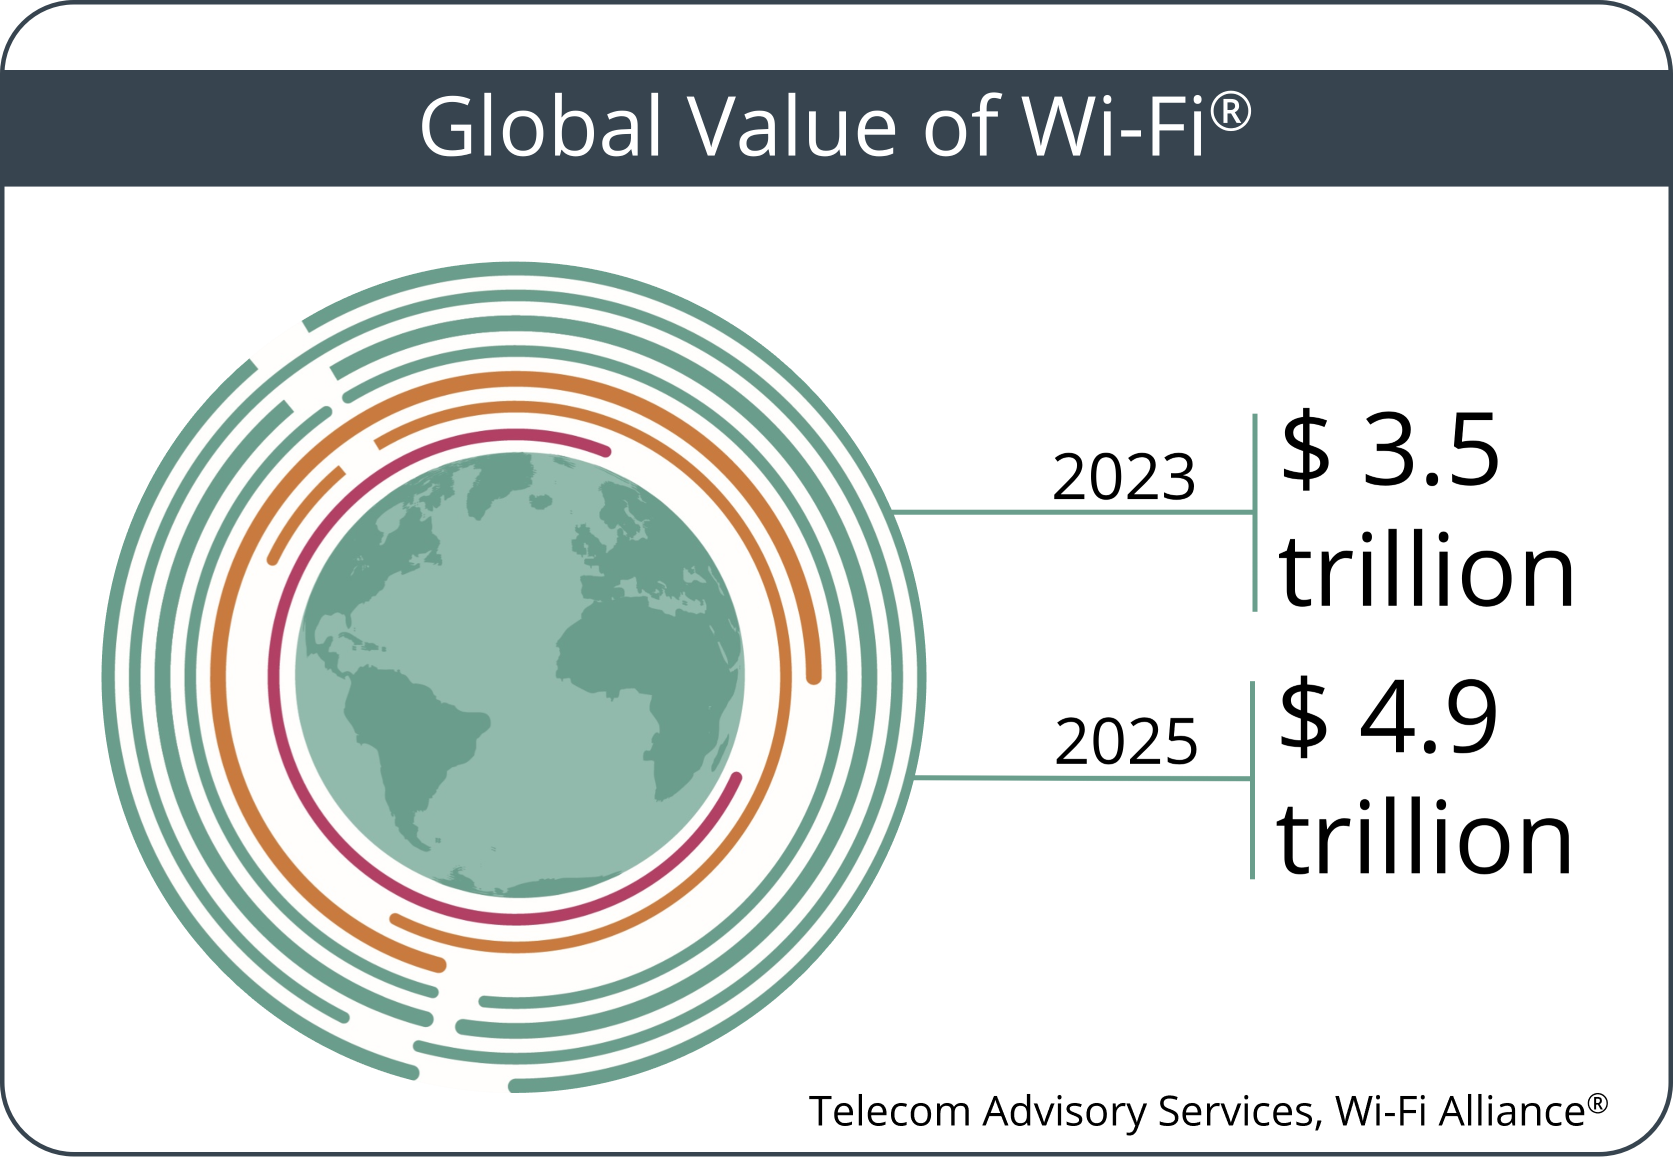 https://www.wi-fi.org/sites/default/files/public/images/Value_of_Wi-Fi_2023-2025-Global_Value_of_Wi-Fi.png